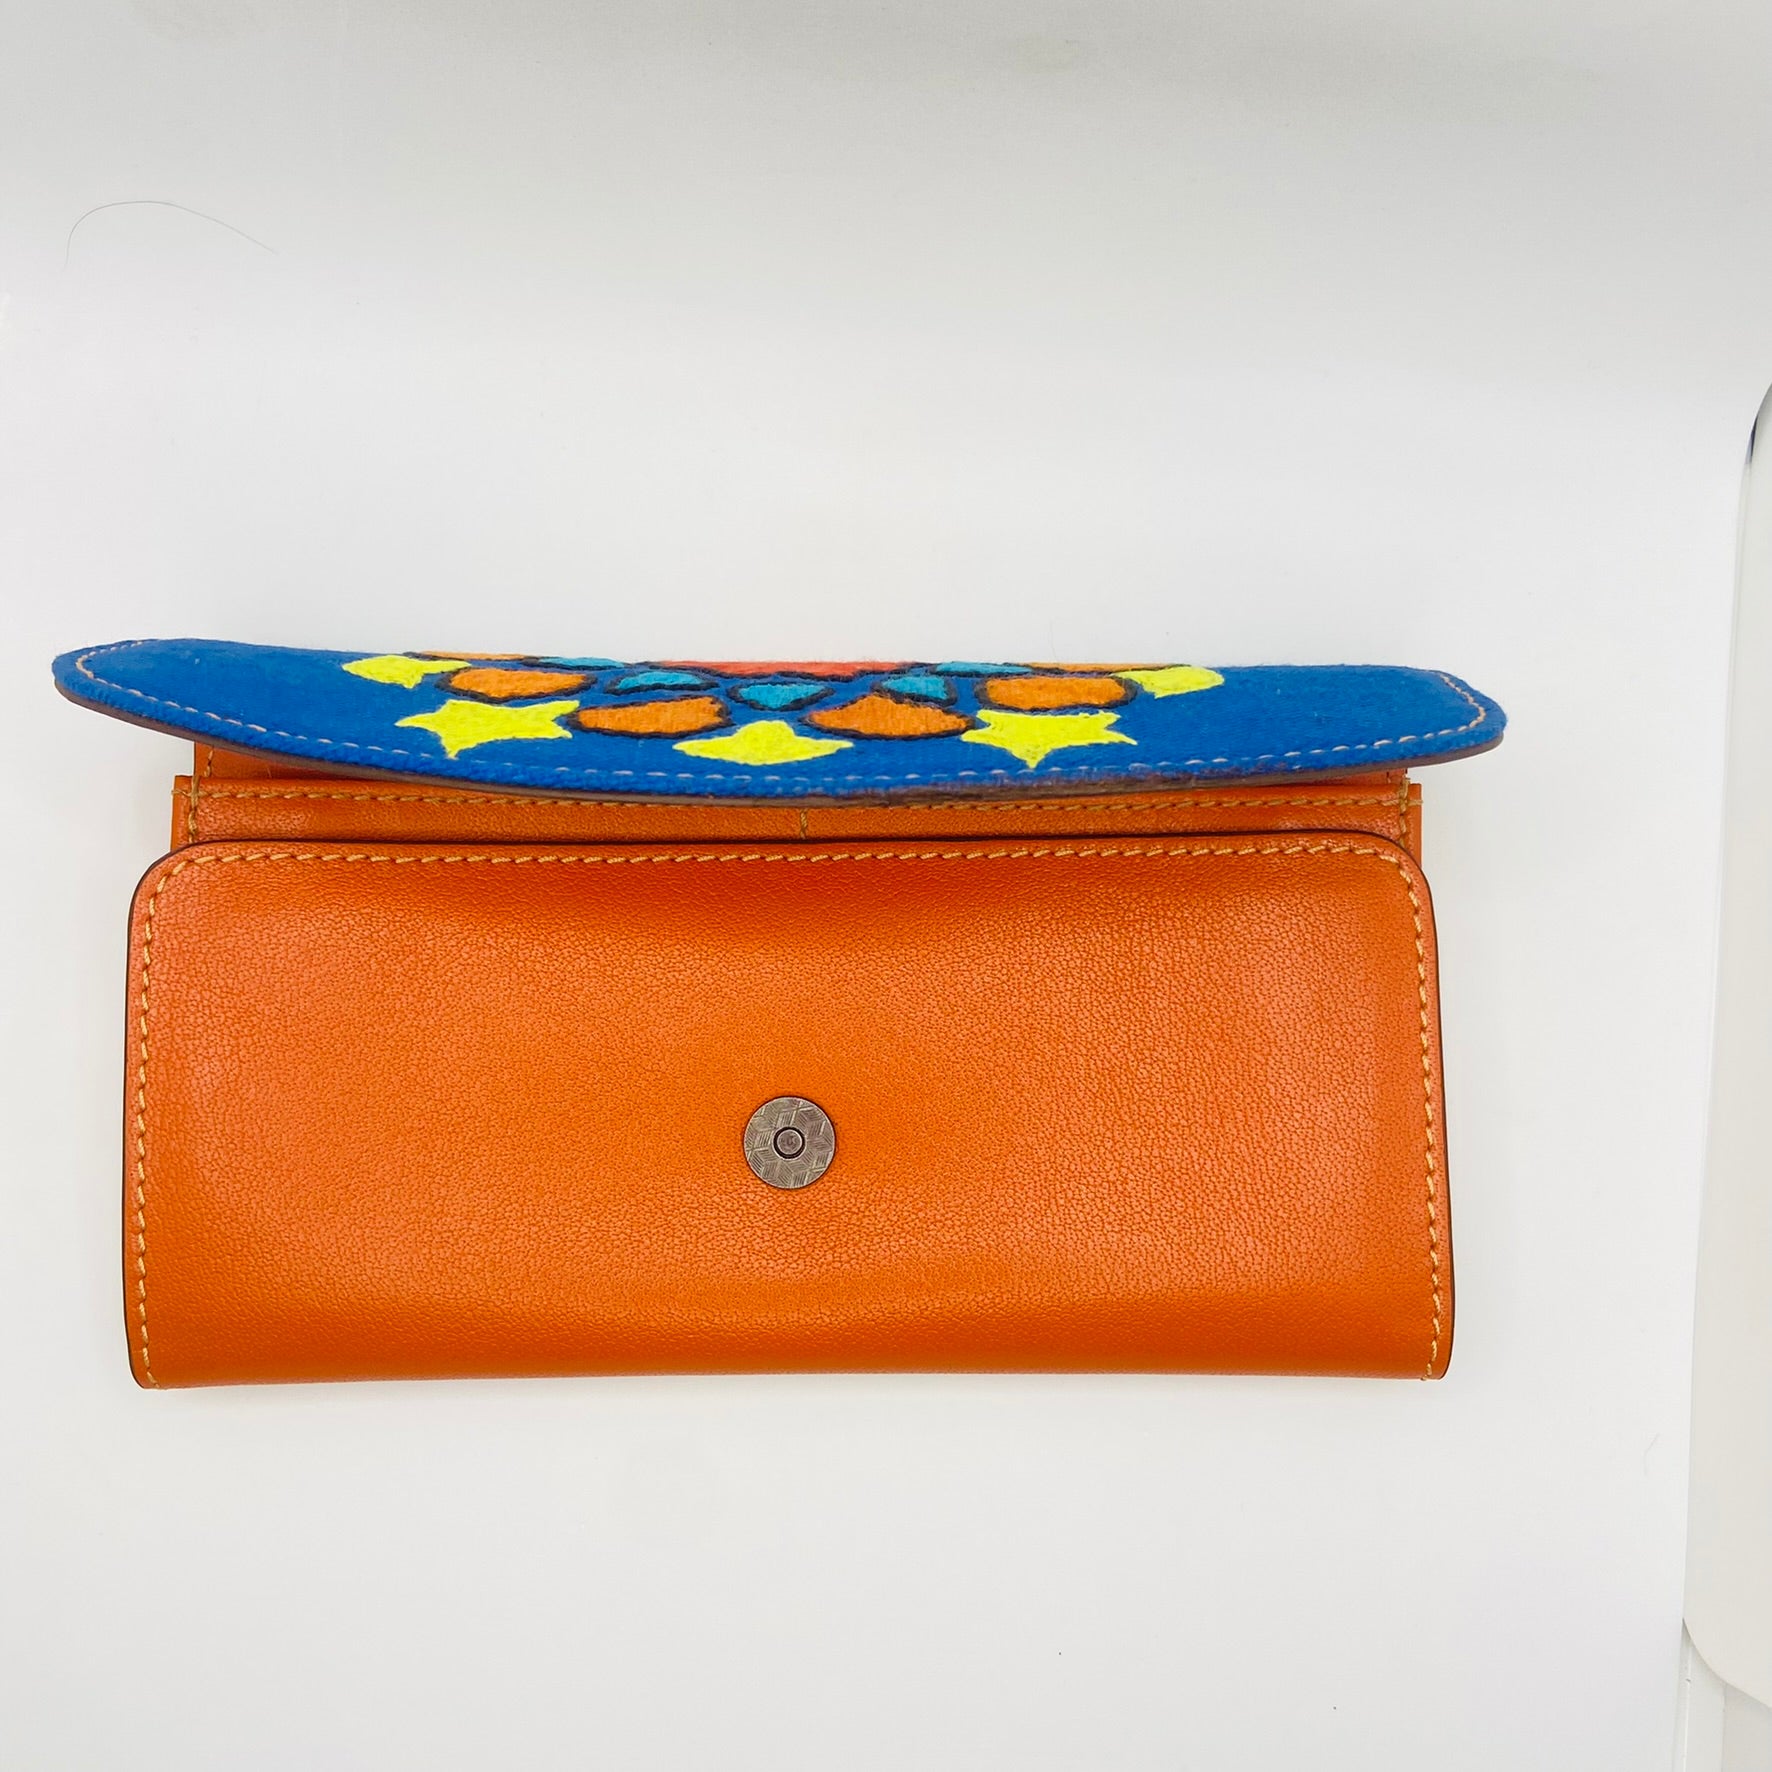 Chic Stitches: Leather & Embroidery Wallet Elegance - Nuba Arts